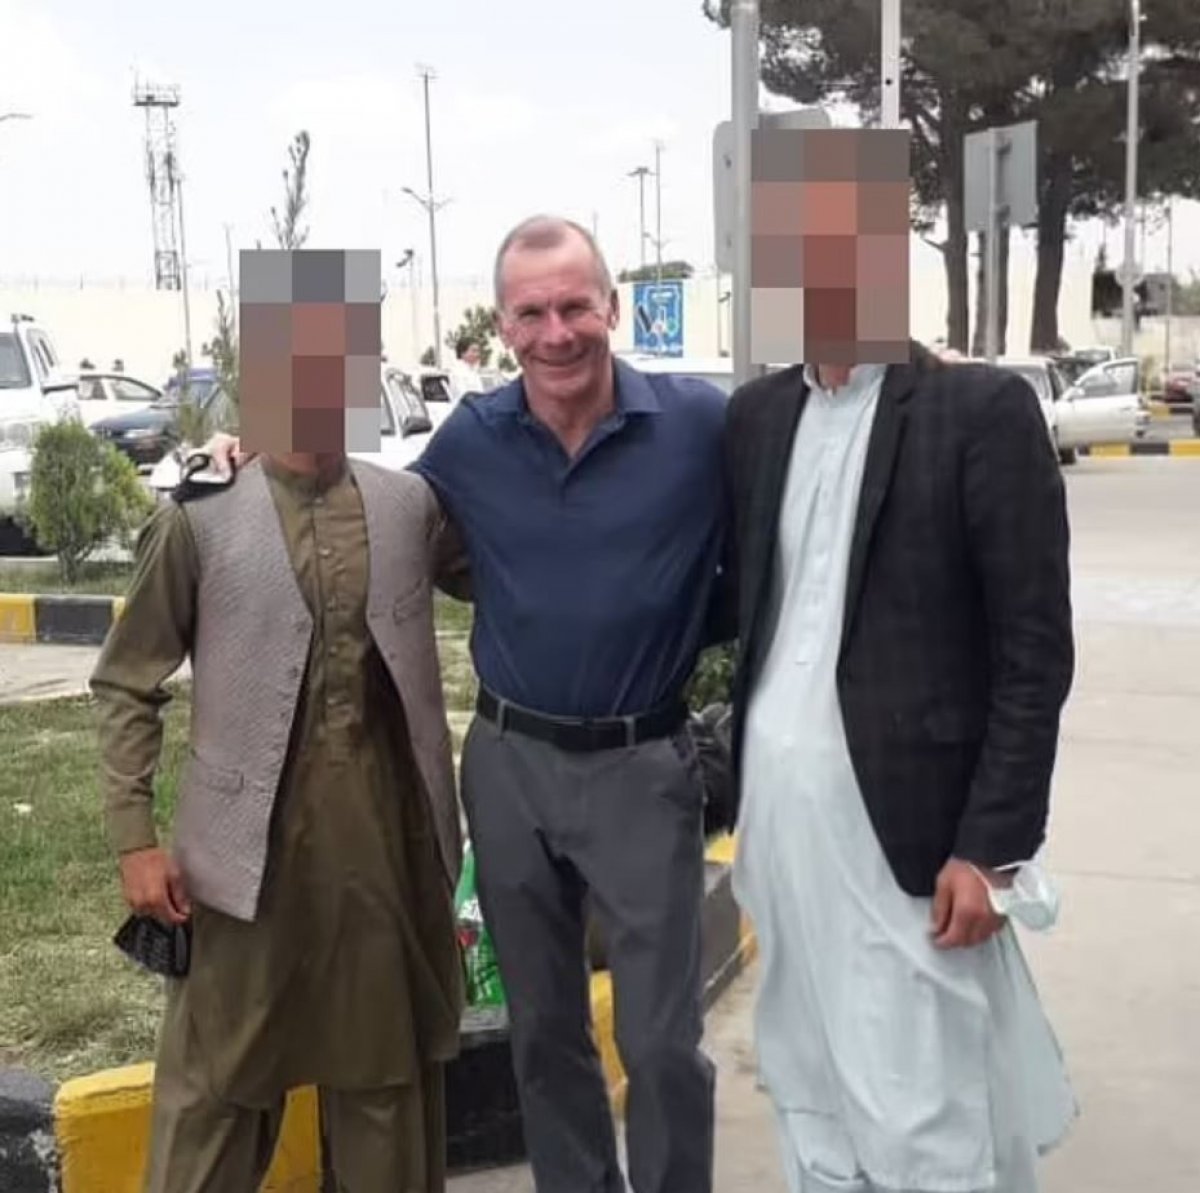 Retired British soldier passed through Taliban posts dressed as Afghan #1